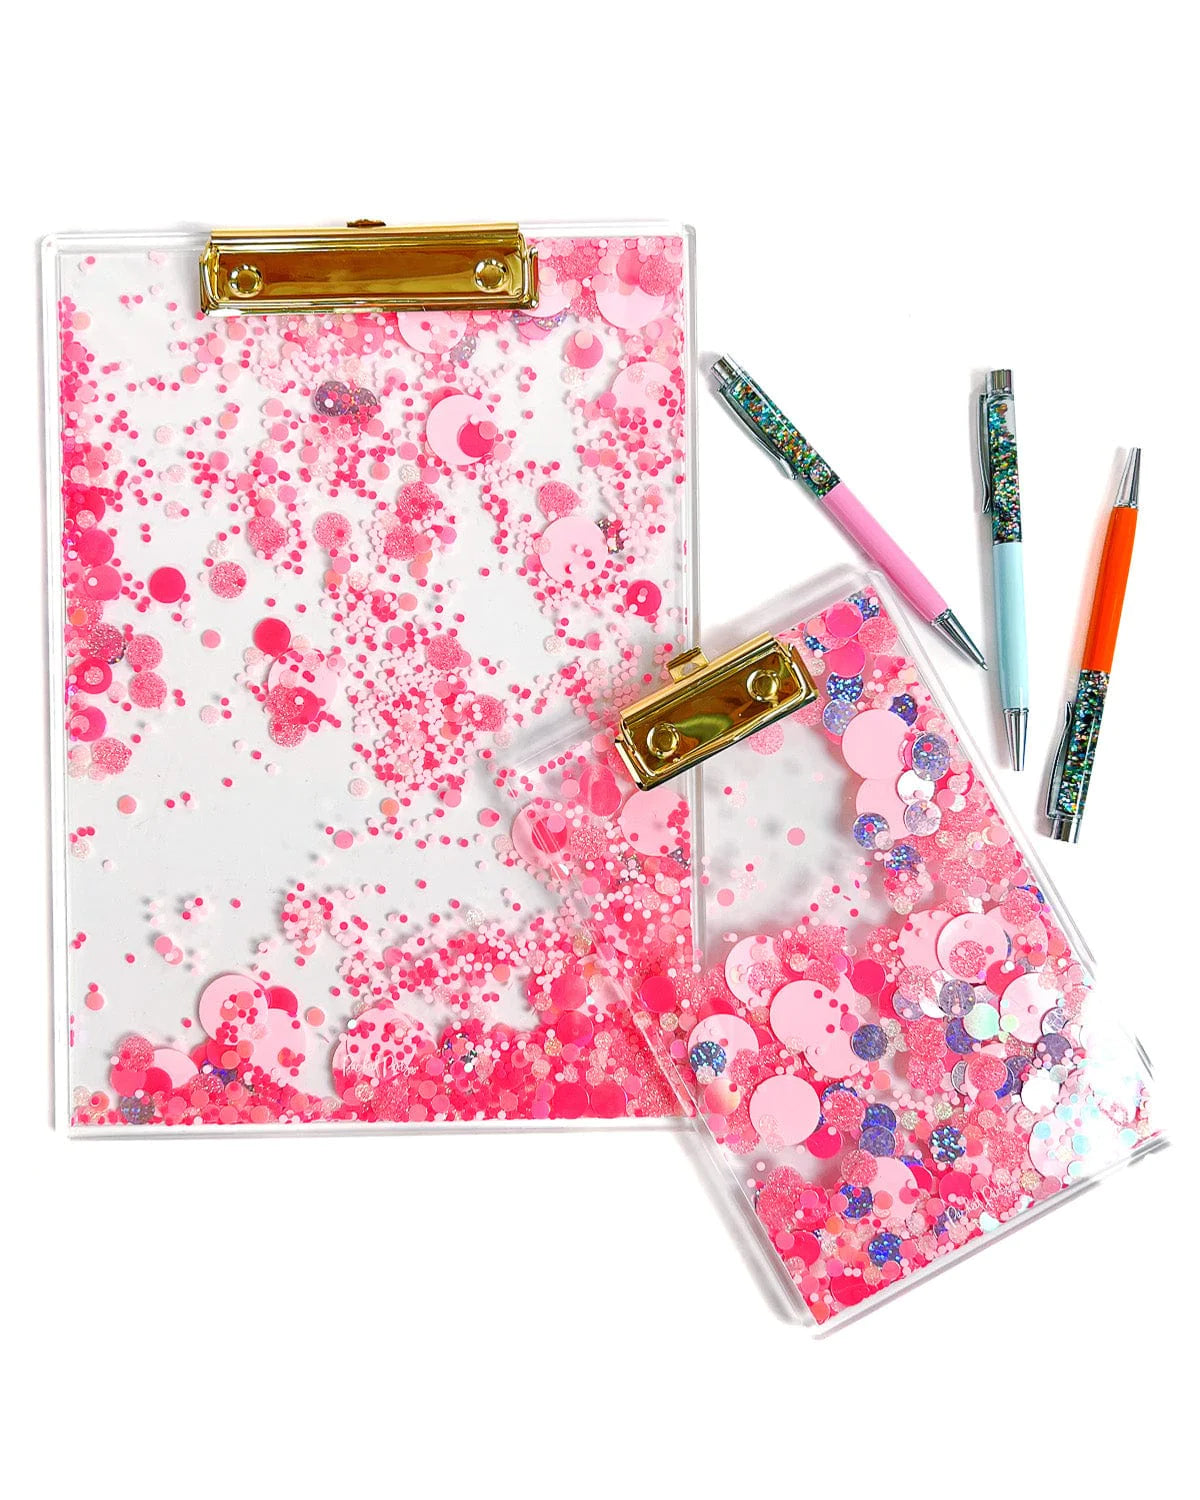 Shop Packed Party Pink Party Confetti Clear Clipboard (Mini) - Premium Stationary from Packed Party Online now at Spoiled Brat 